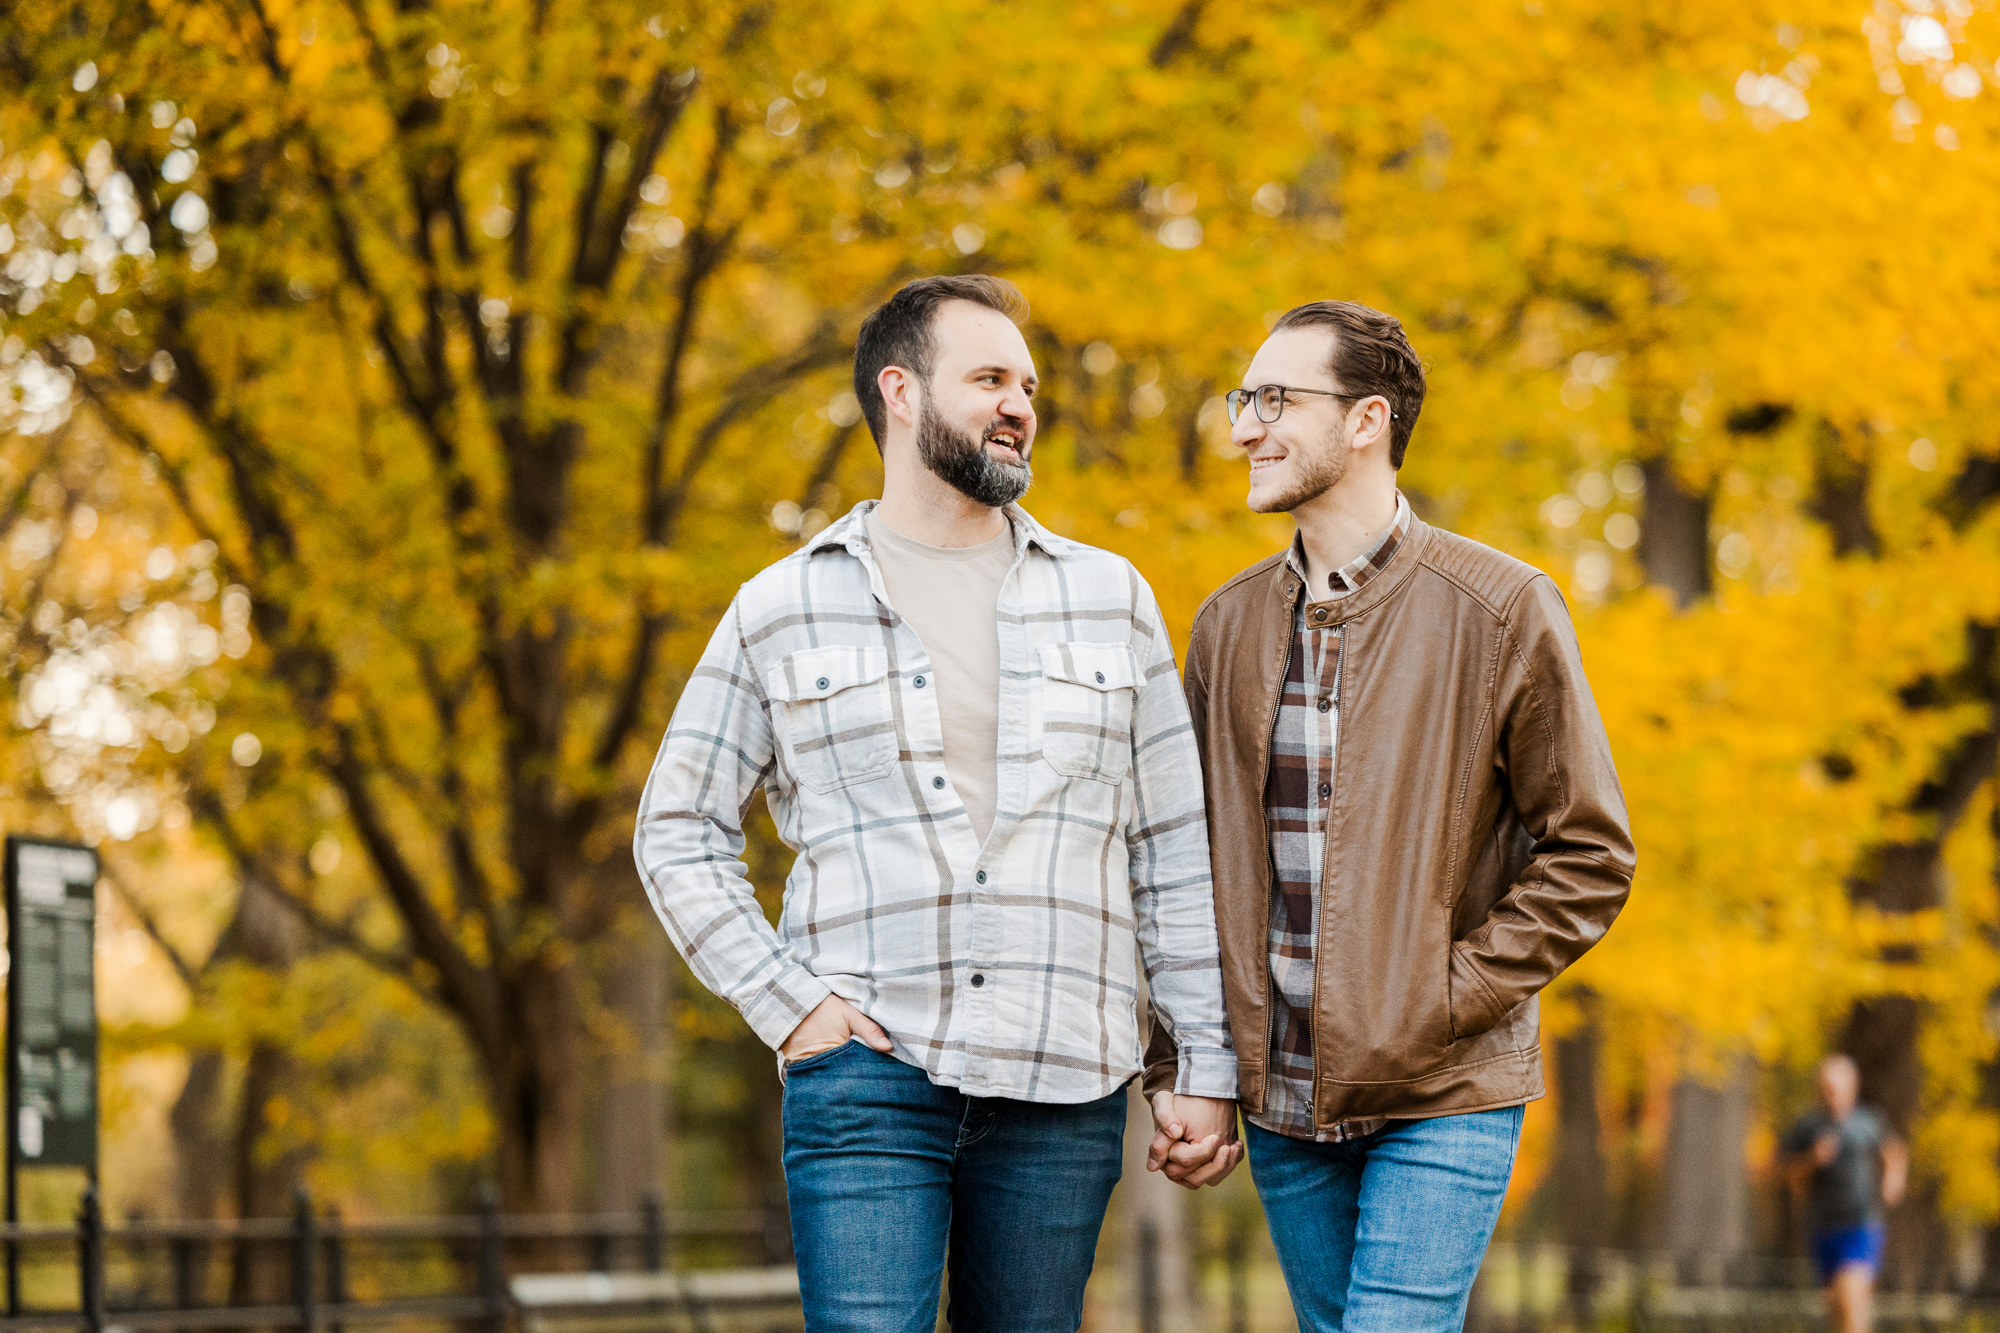 Adorable Engagement Photo Shoot in Central Park